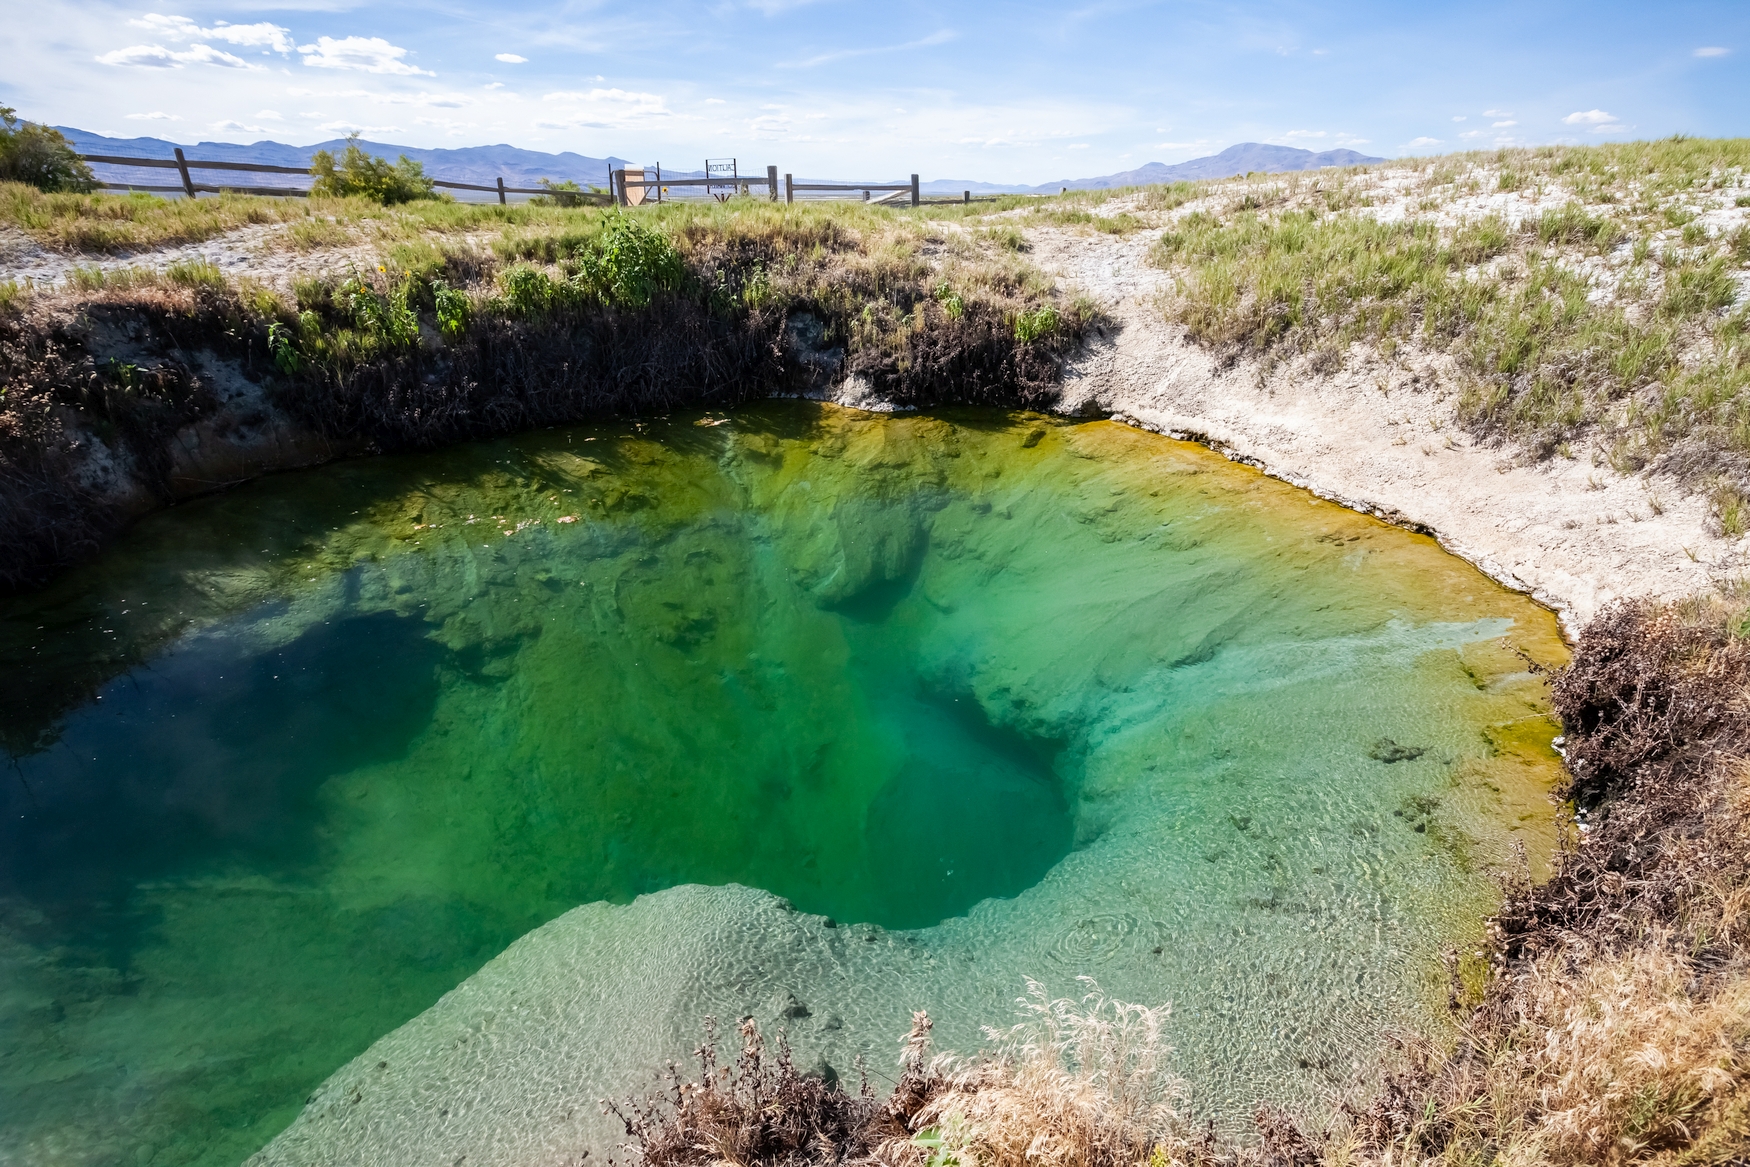 Photo of a deep hot spring pool in the Black Rock Desert, Nevada.